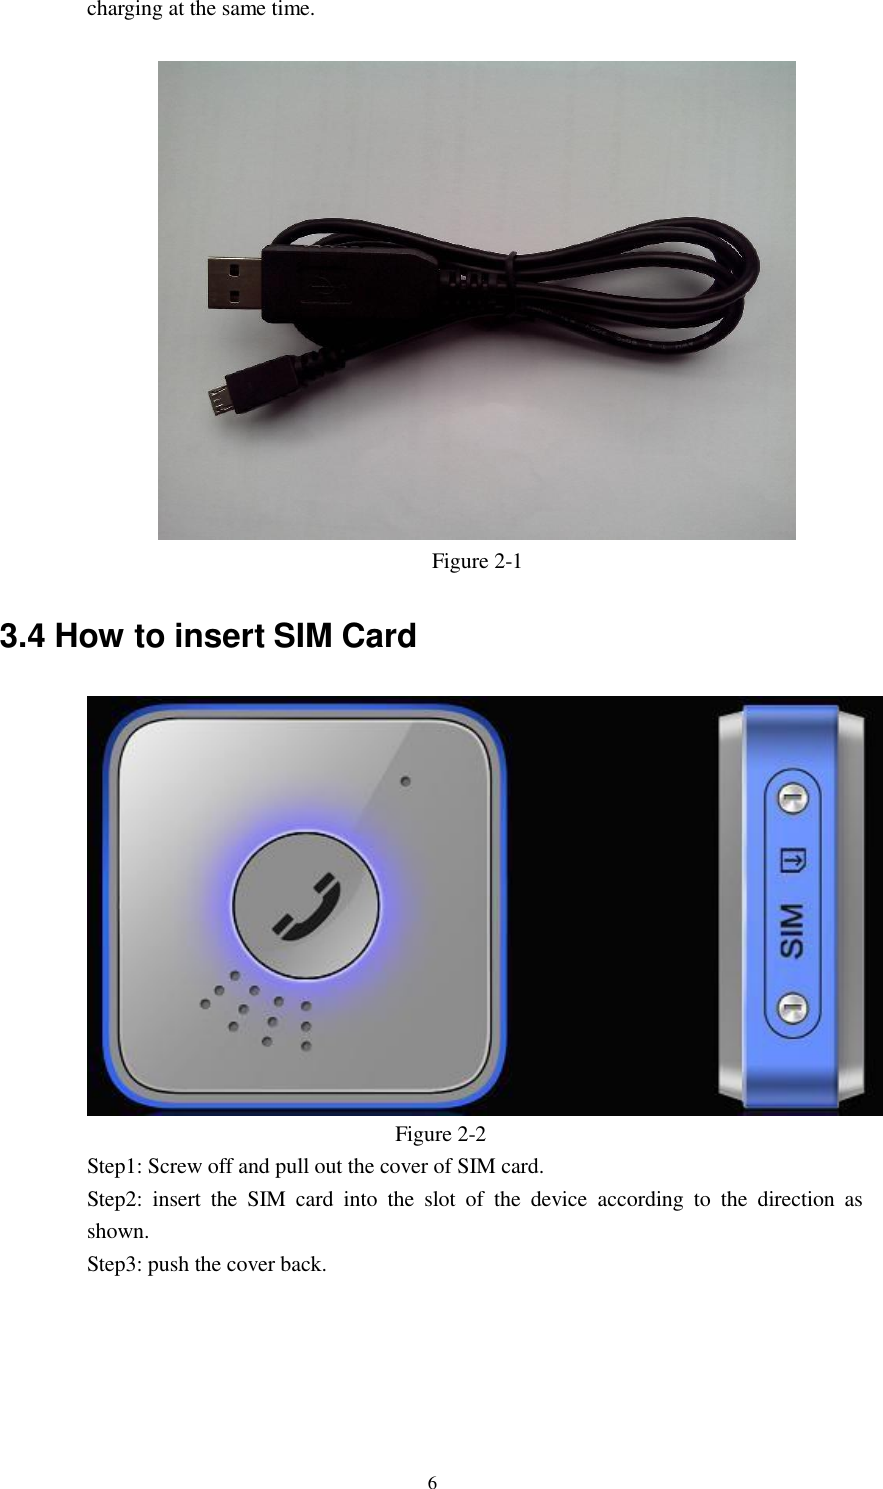 6  charging at the same time.    Figure 2-1   3.4 How to insert SIM Card    Figure 2-2 Step1: Screw off and pull out the cover of SIM card. Step2:  insert  the  SIM  card  into  the  slot  of  the  device according  to  the  direction  as shown. Step3: push the cover back. 